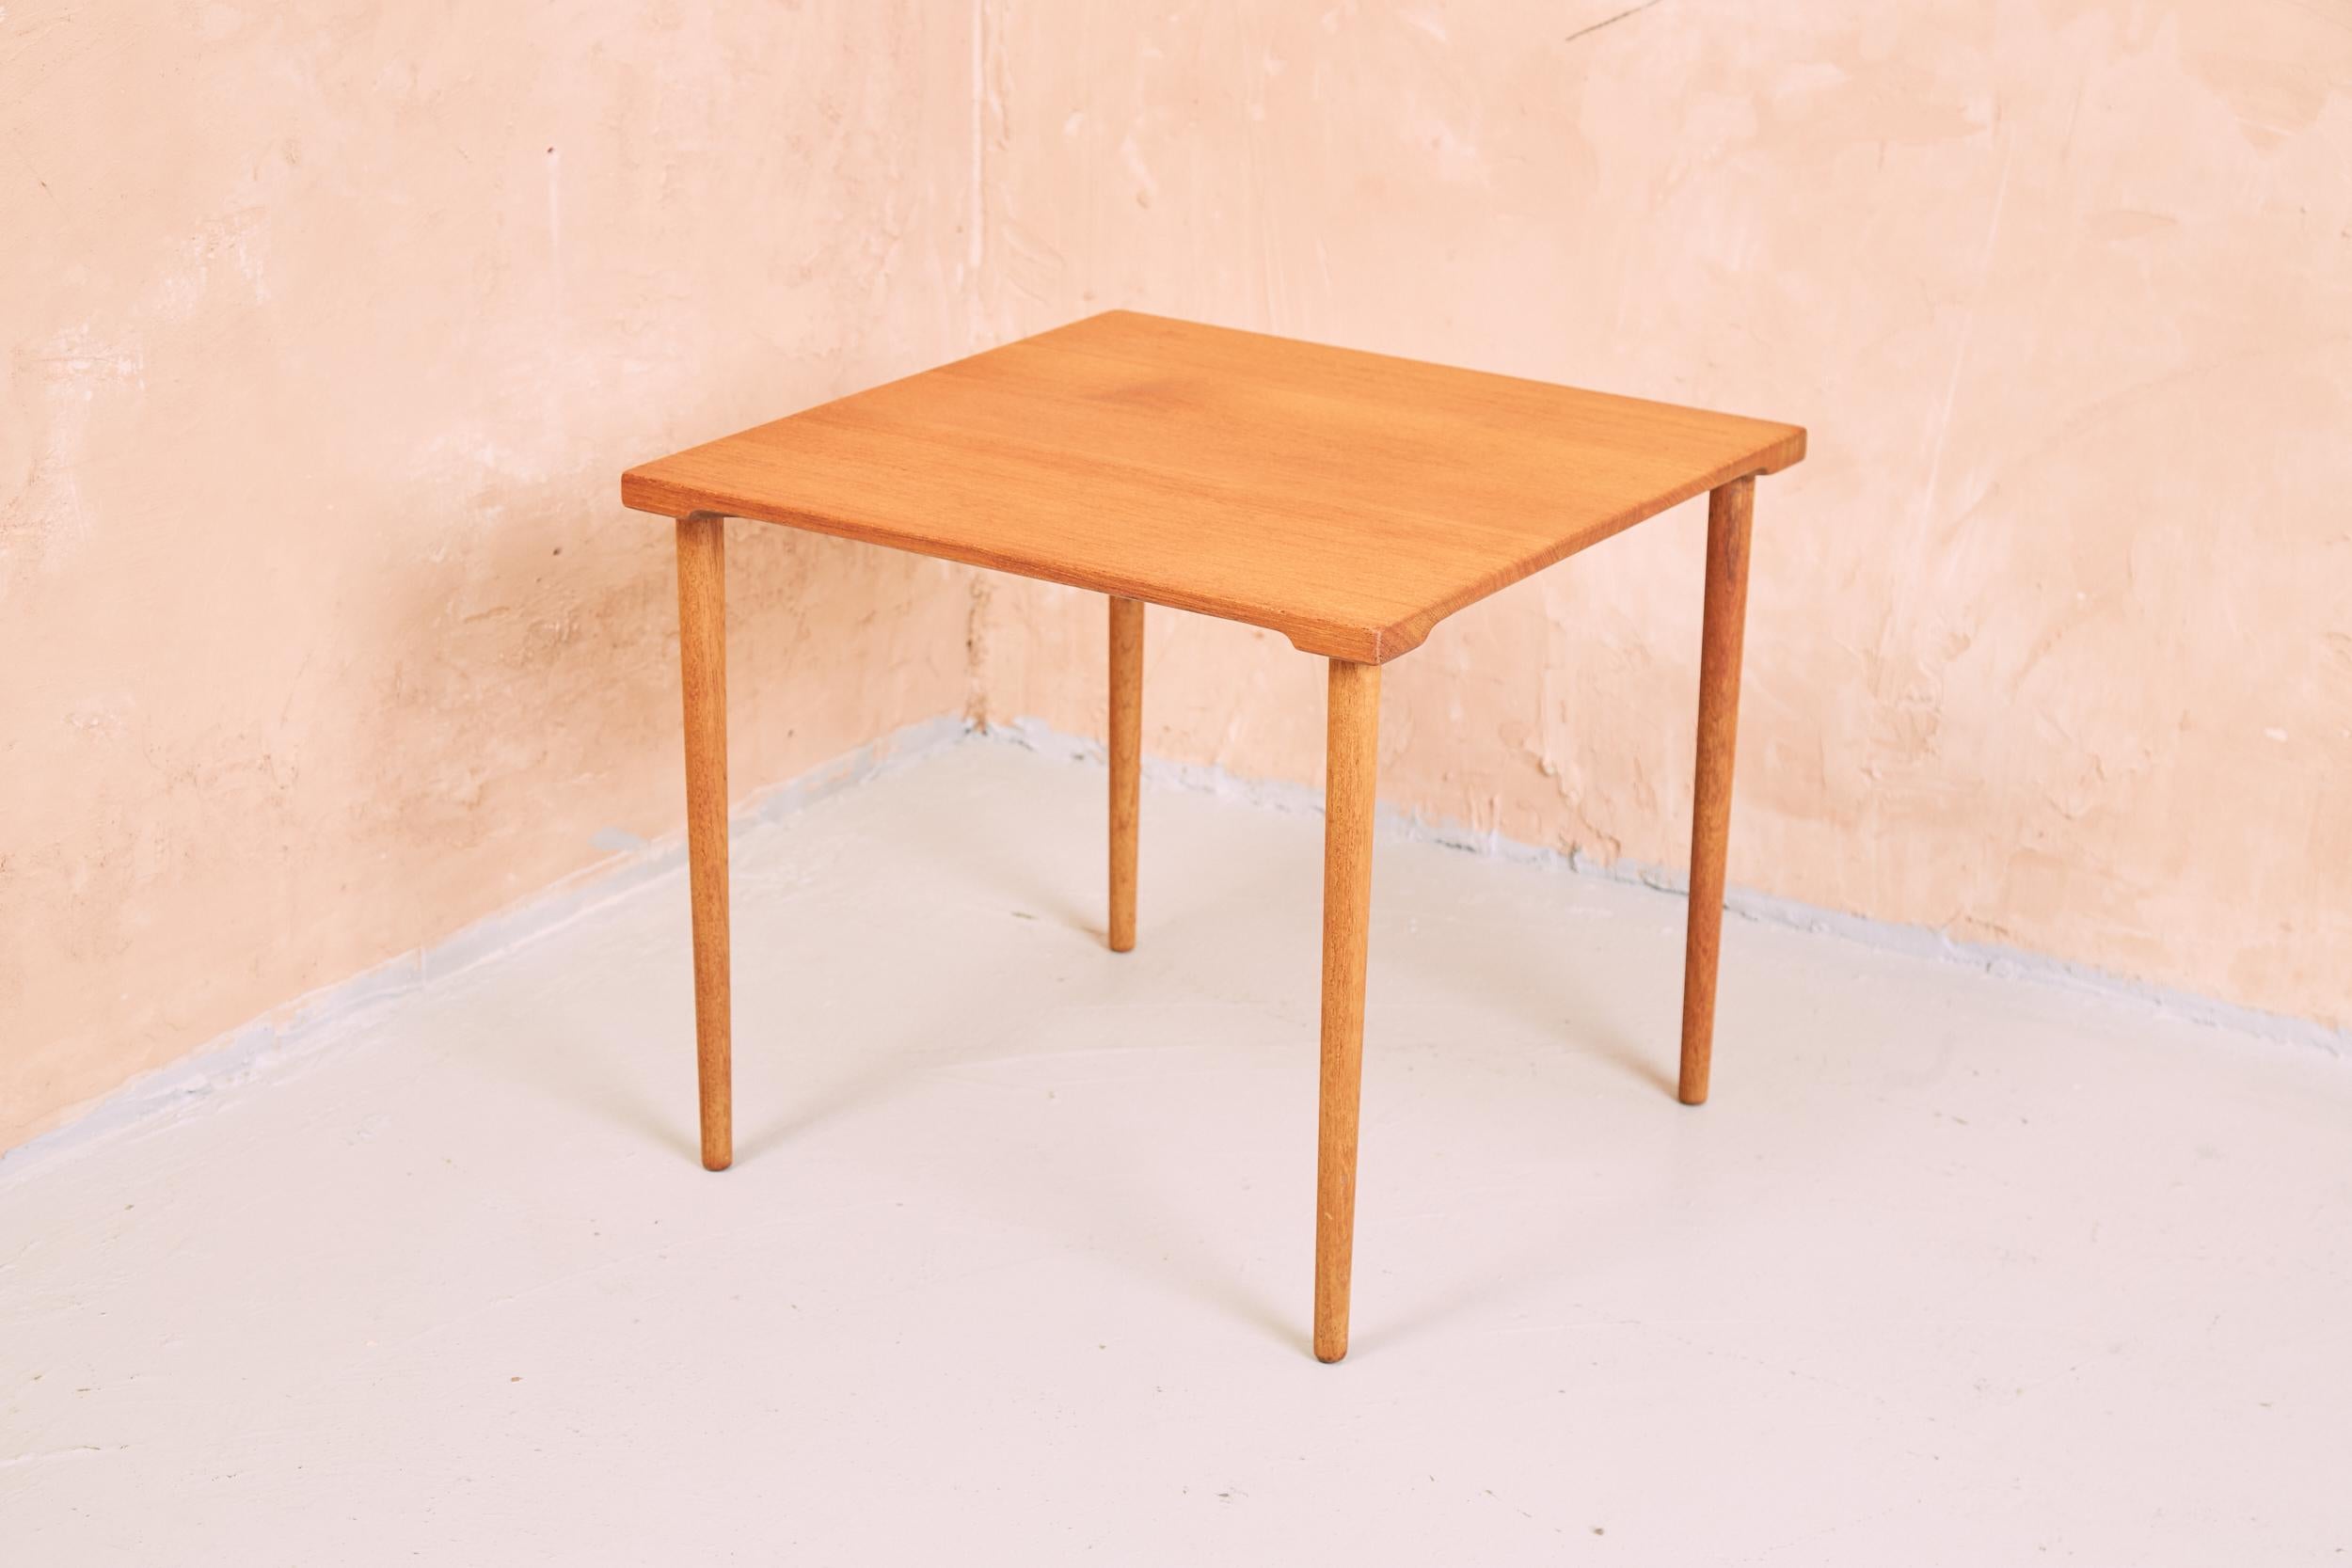 Danish model FD544 occasional side table by Edvard Kindt-Larsen for Danish manufacturer France & Son. Designed in the late 1950s and made of solid teak with shaped edges and turned legs it can be easily dismantled and flat packed for shipping.